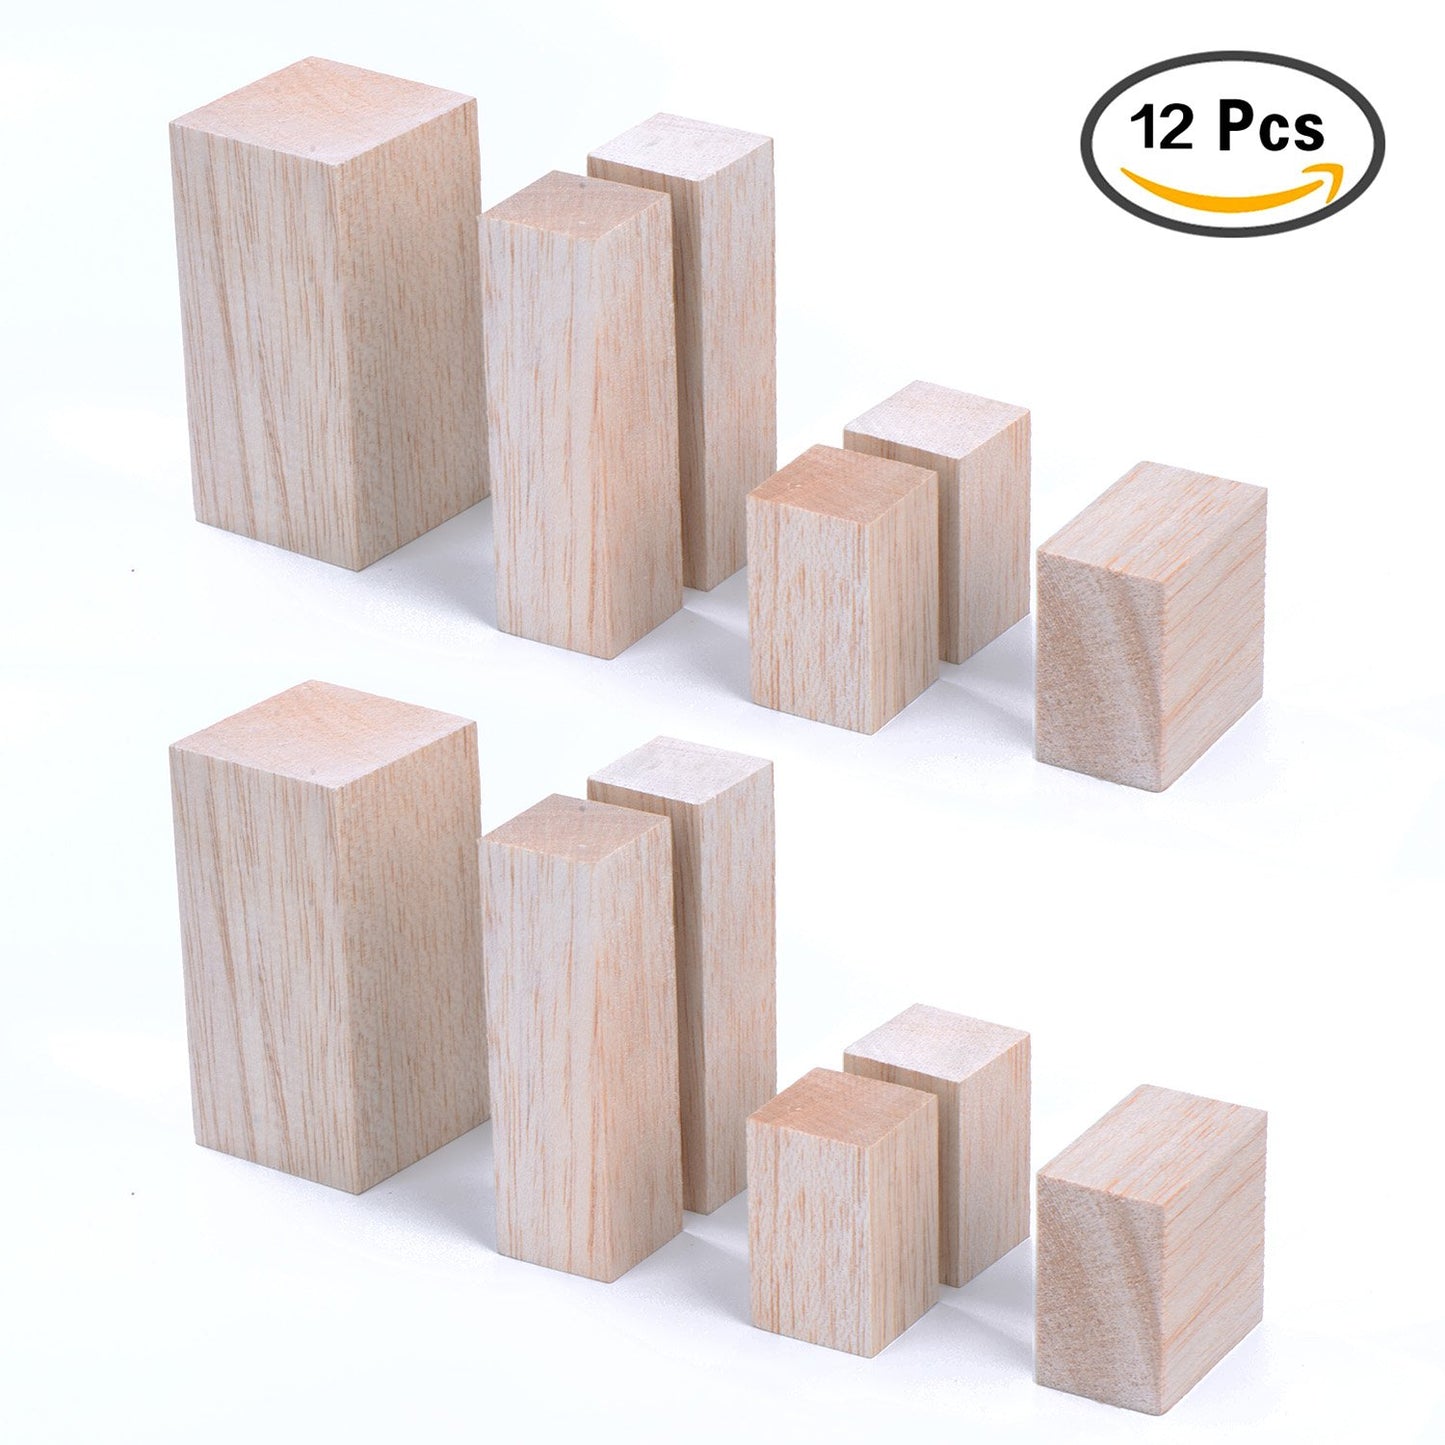 Sumind 12 Pieces Unfinished Balsa Wood Mini Carving Blocks, 4 Sizes, 50 x 50 x 100 mm, 30 x 30 x 100 mm, 30 x 30 x 50 mm, 50 x 30 x 50 mm